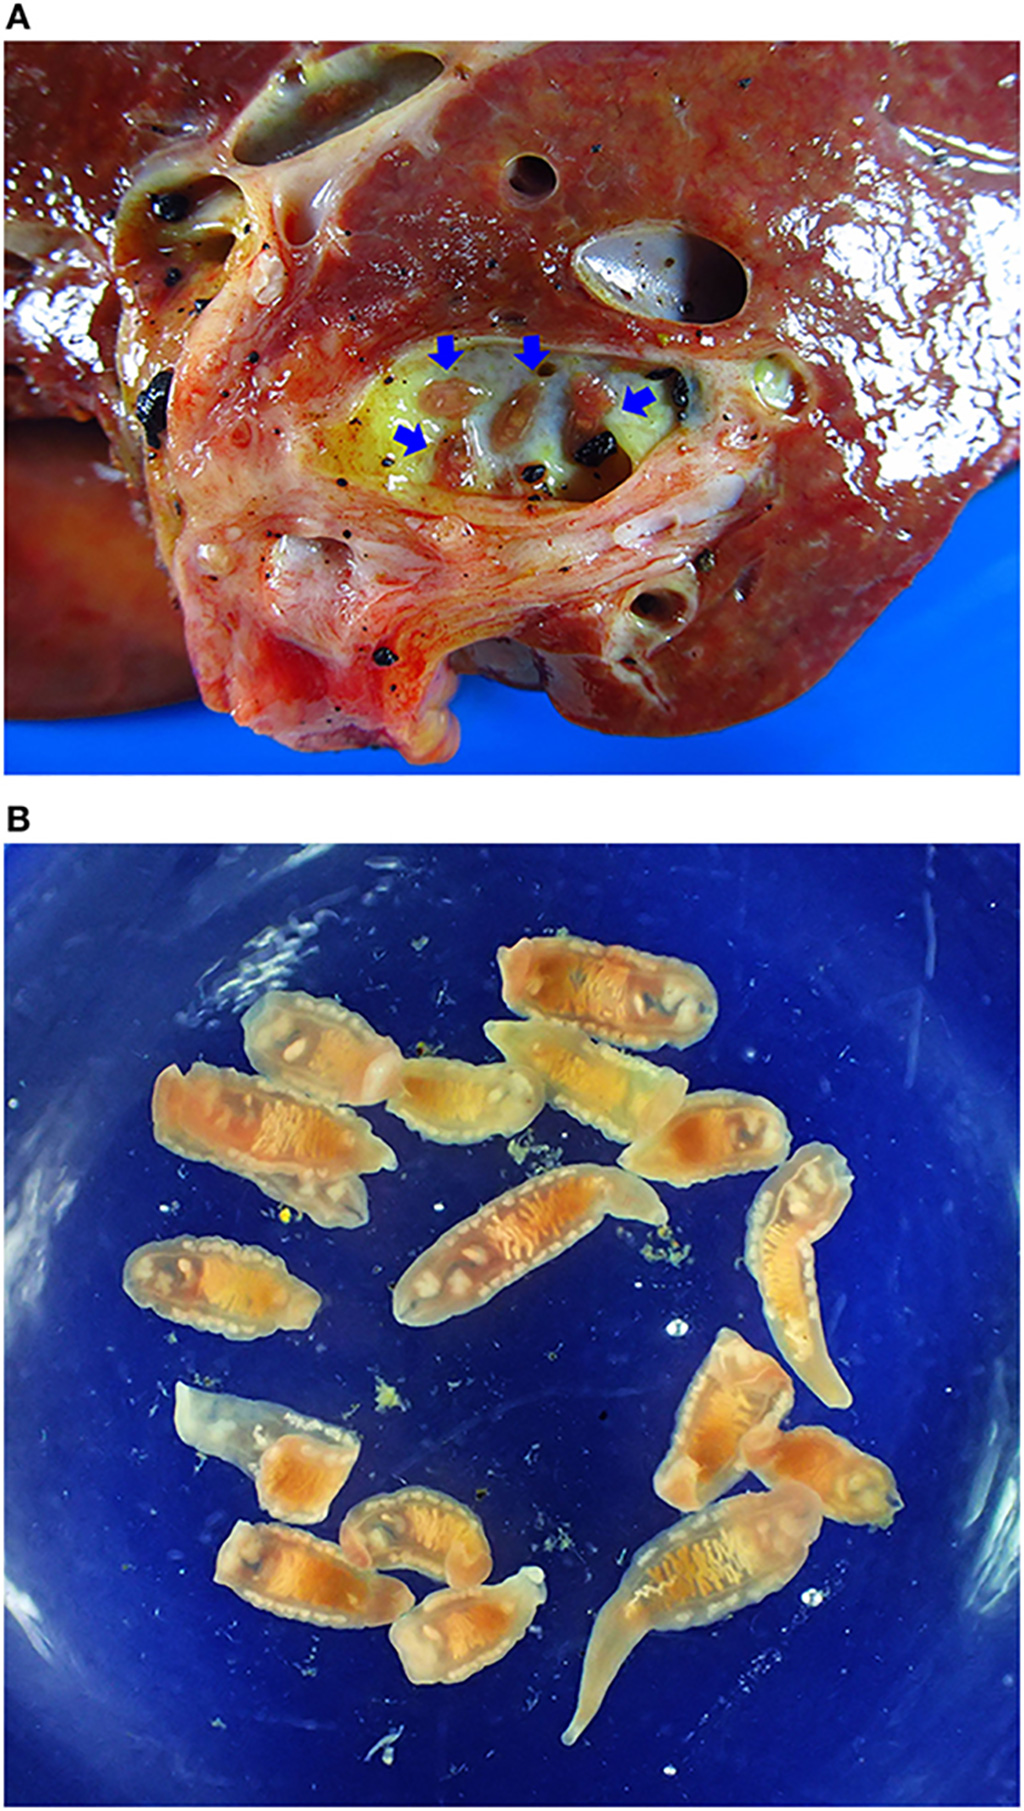 Image: Opisthorchiasis-associated cholangiocarcinoma. (A) Cholangiocarcinoma specimen showing adult worms in the bile duct (blue arrows). (B) Adult Opisthorchis viverrini recovered from the liver (Photo courtesy of Khon Kaen University)